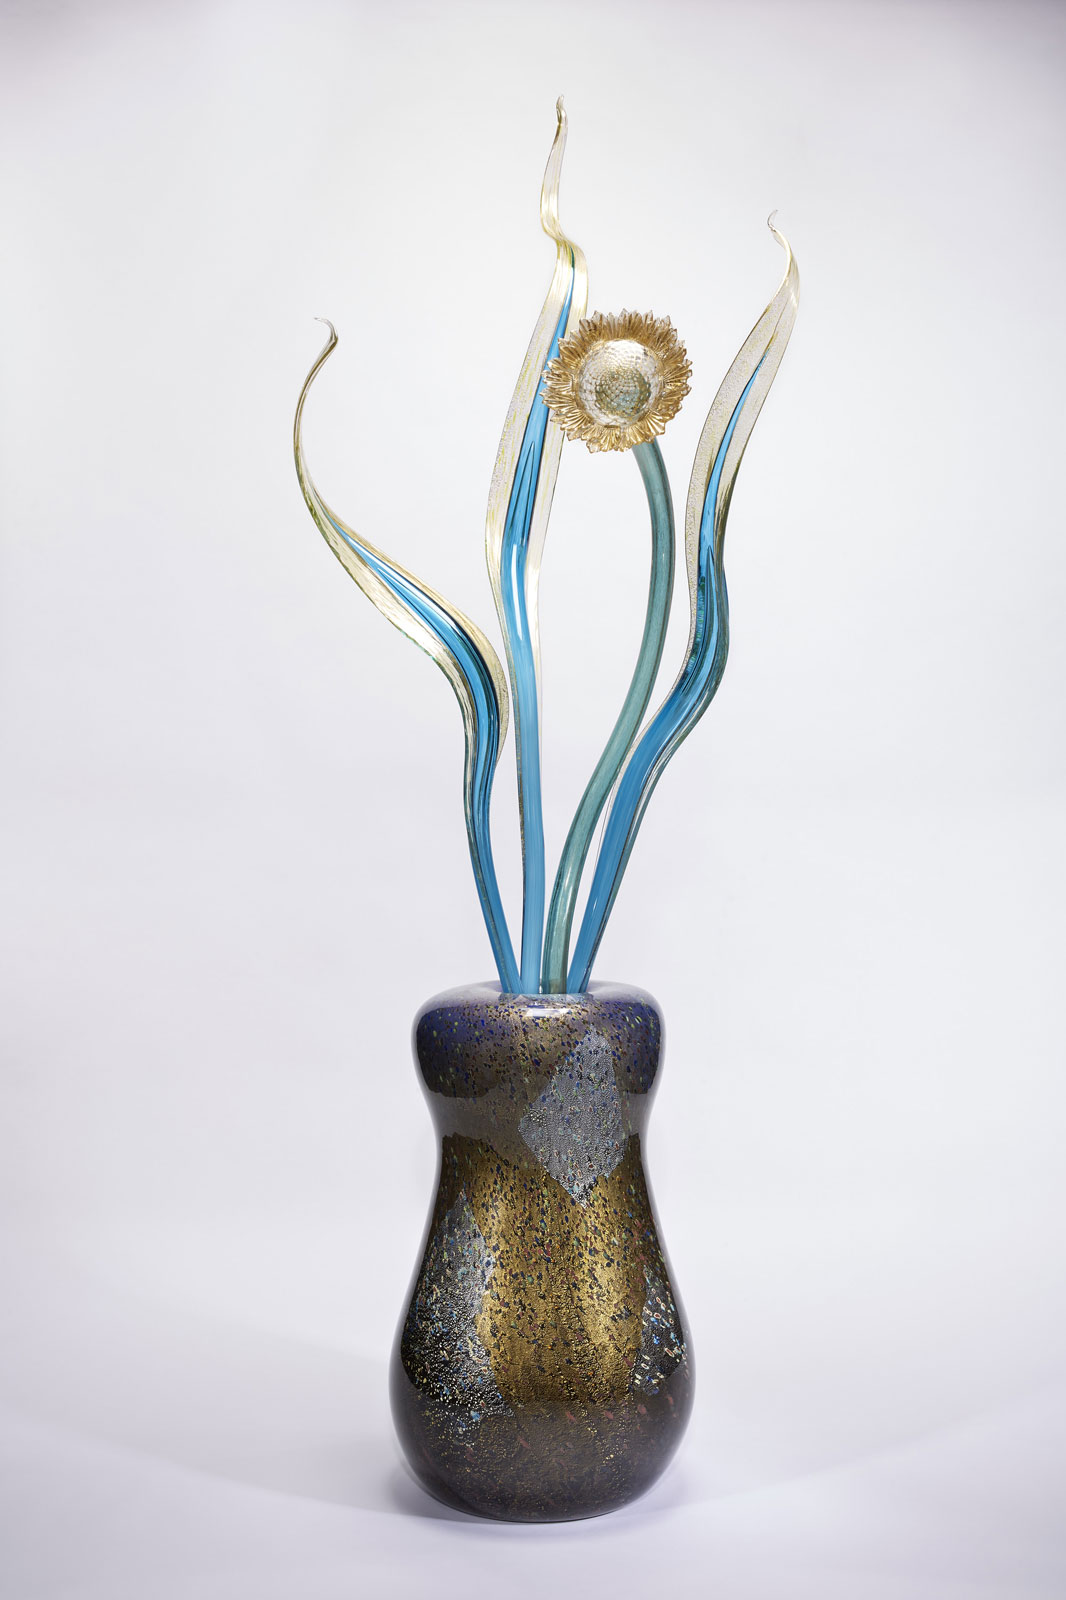 Dappled Midnight Blue Ikebana with Feathers and Stem, 2018 by Dale Chihuly